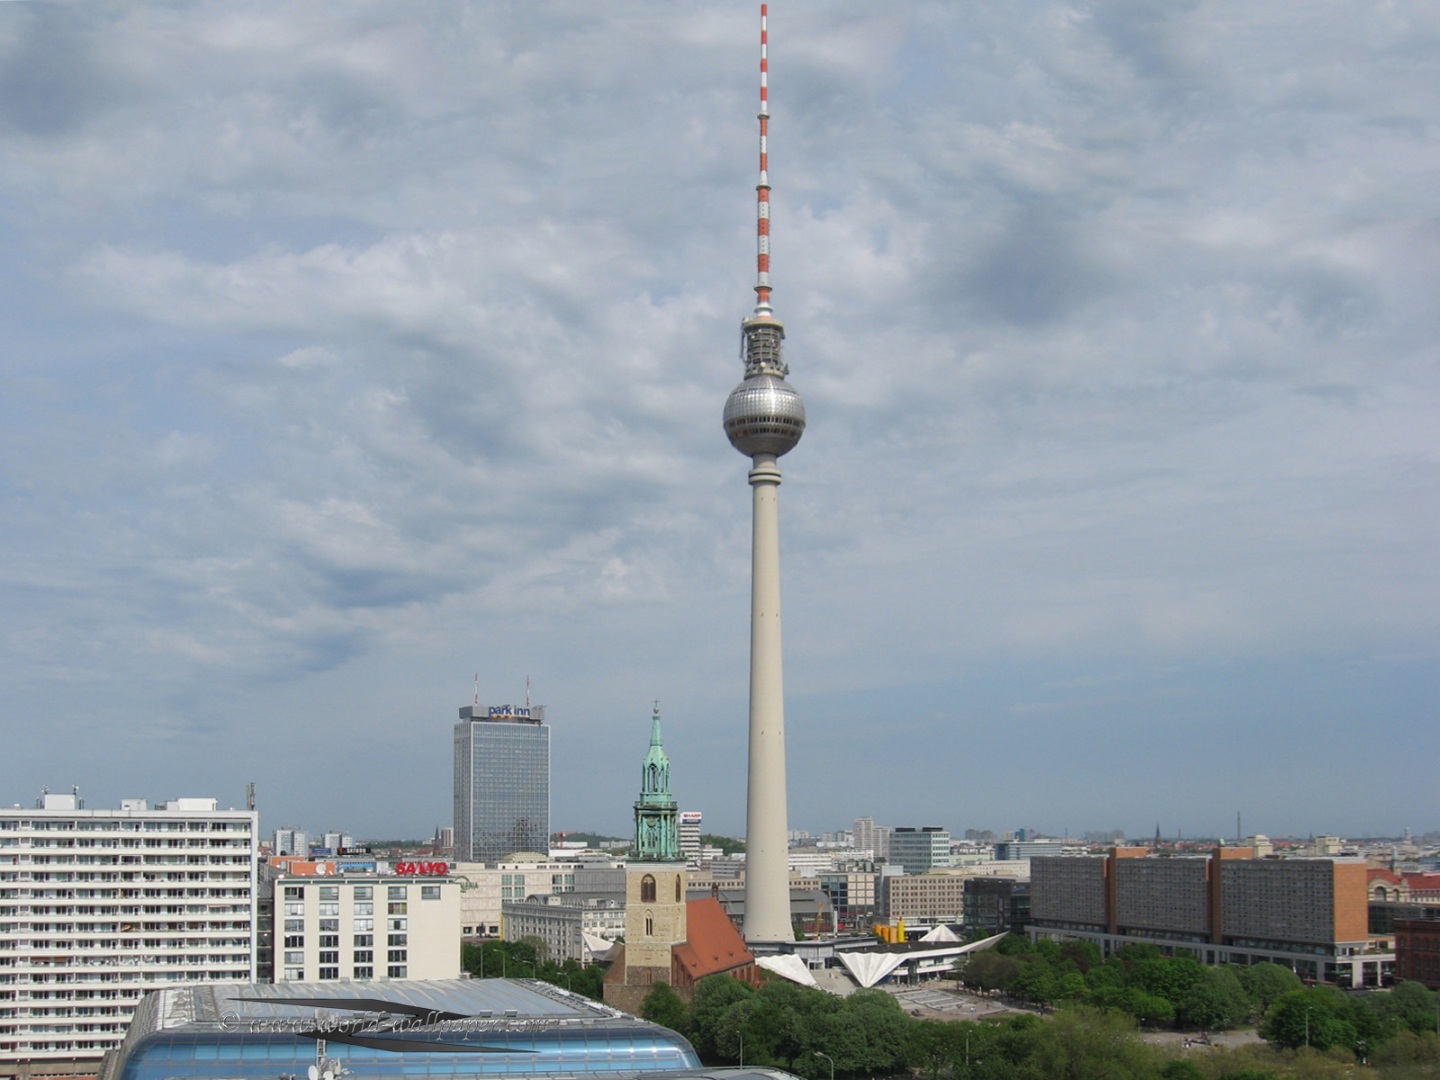 Is This Fernsehturm Berlin The Location